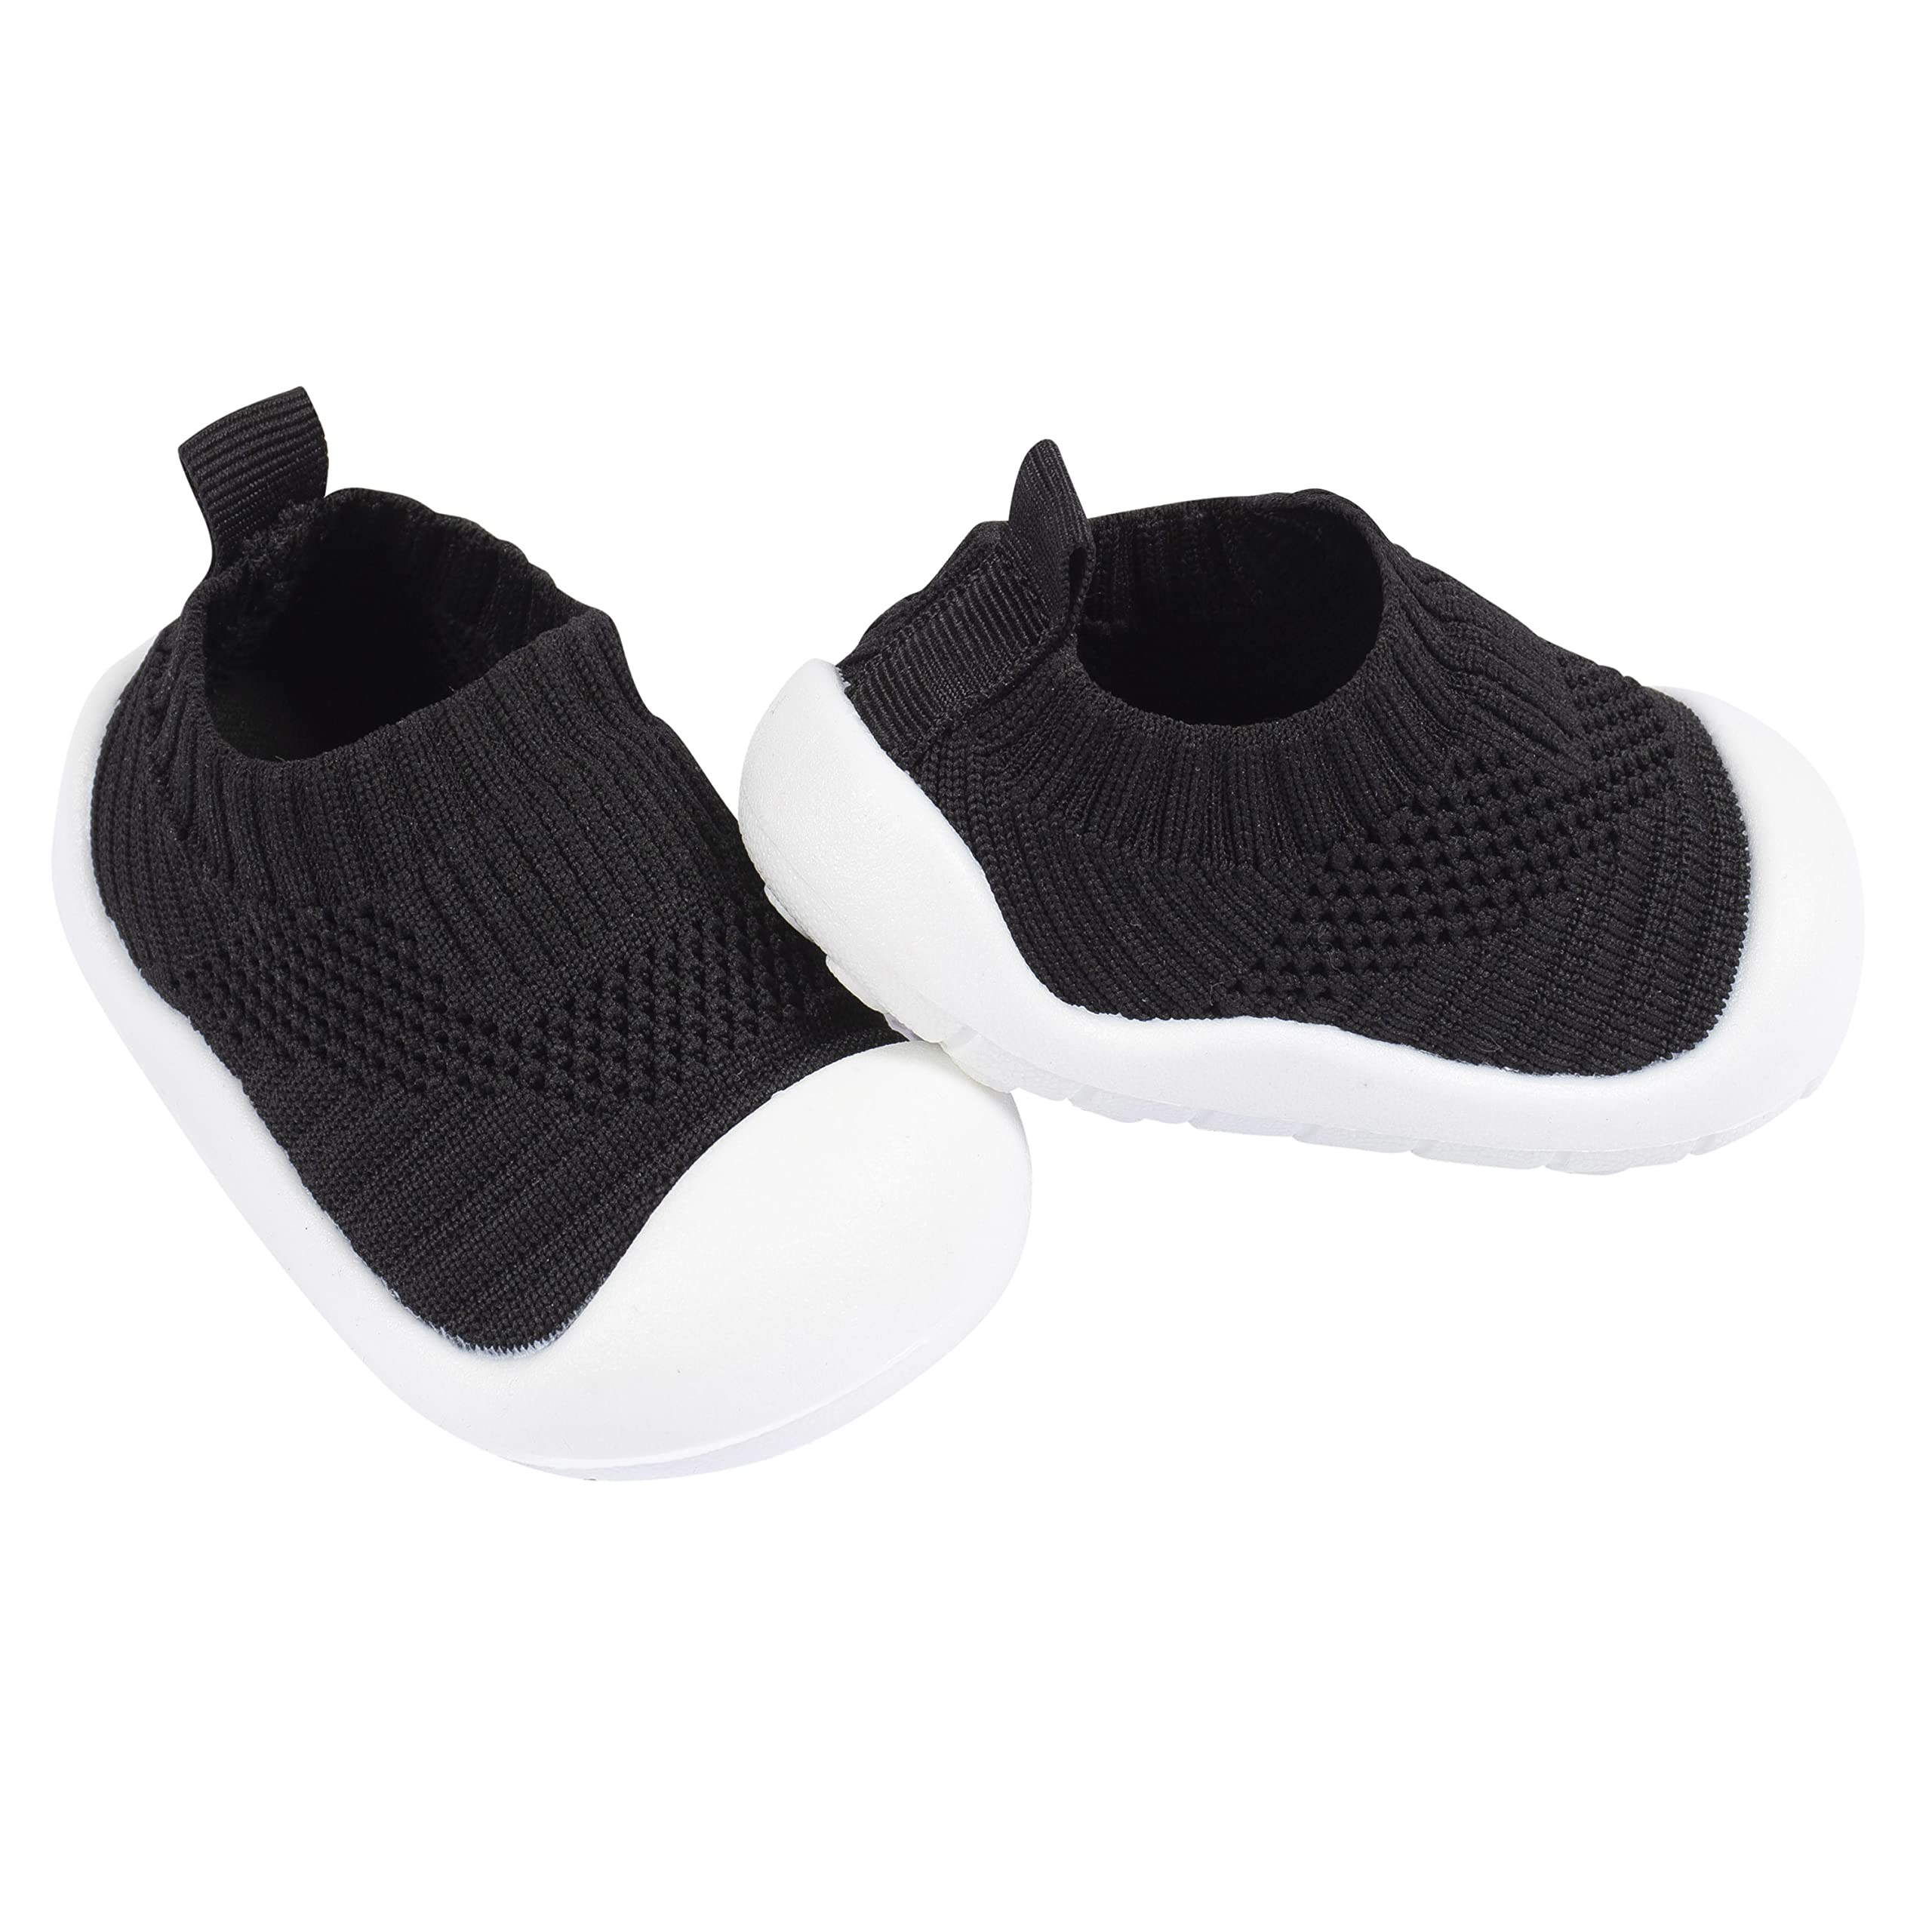 Gerber Unisex-Child Baby Toddler Boy and Girl Stretchy Knit Slip-on Sneaker Crib Shoe